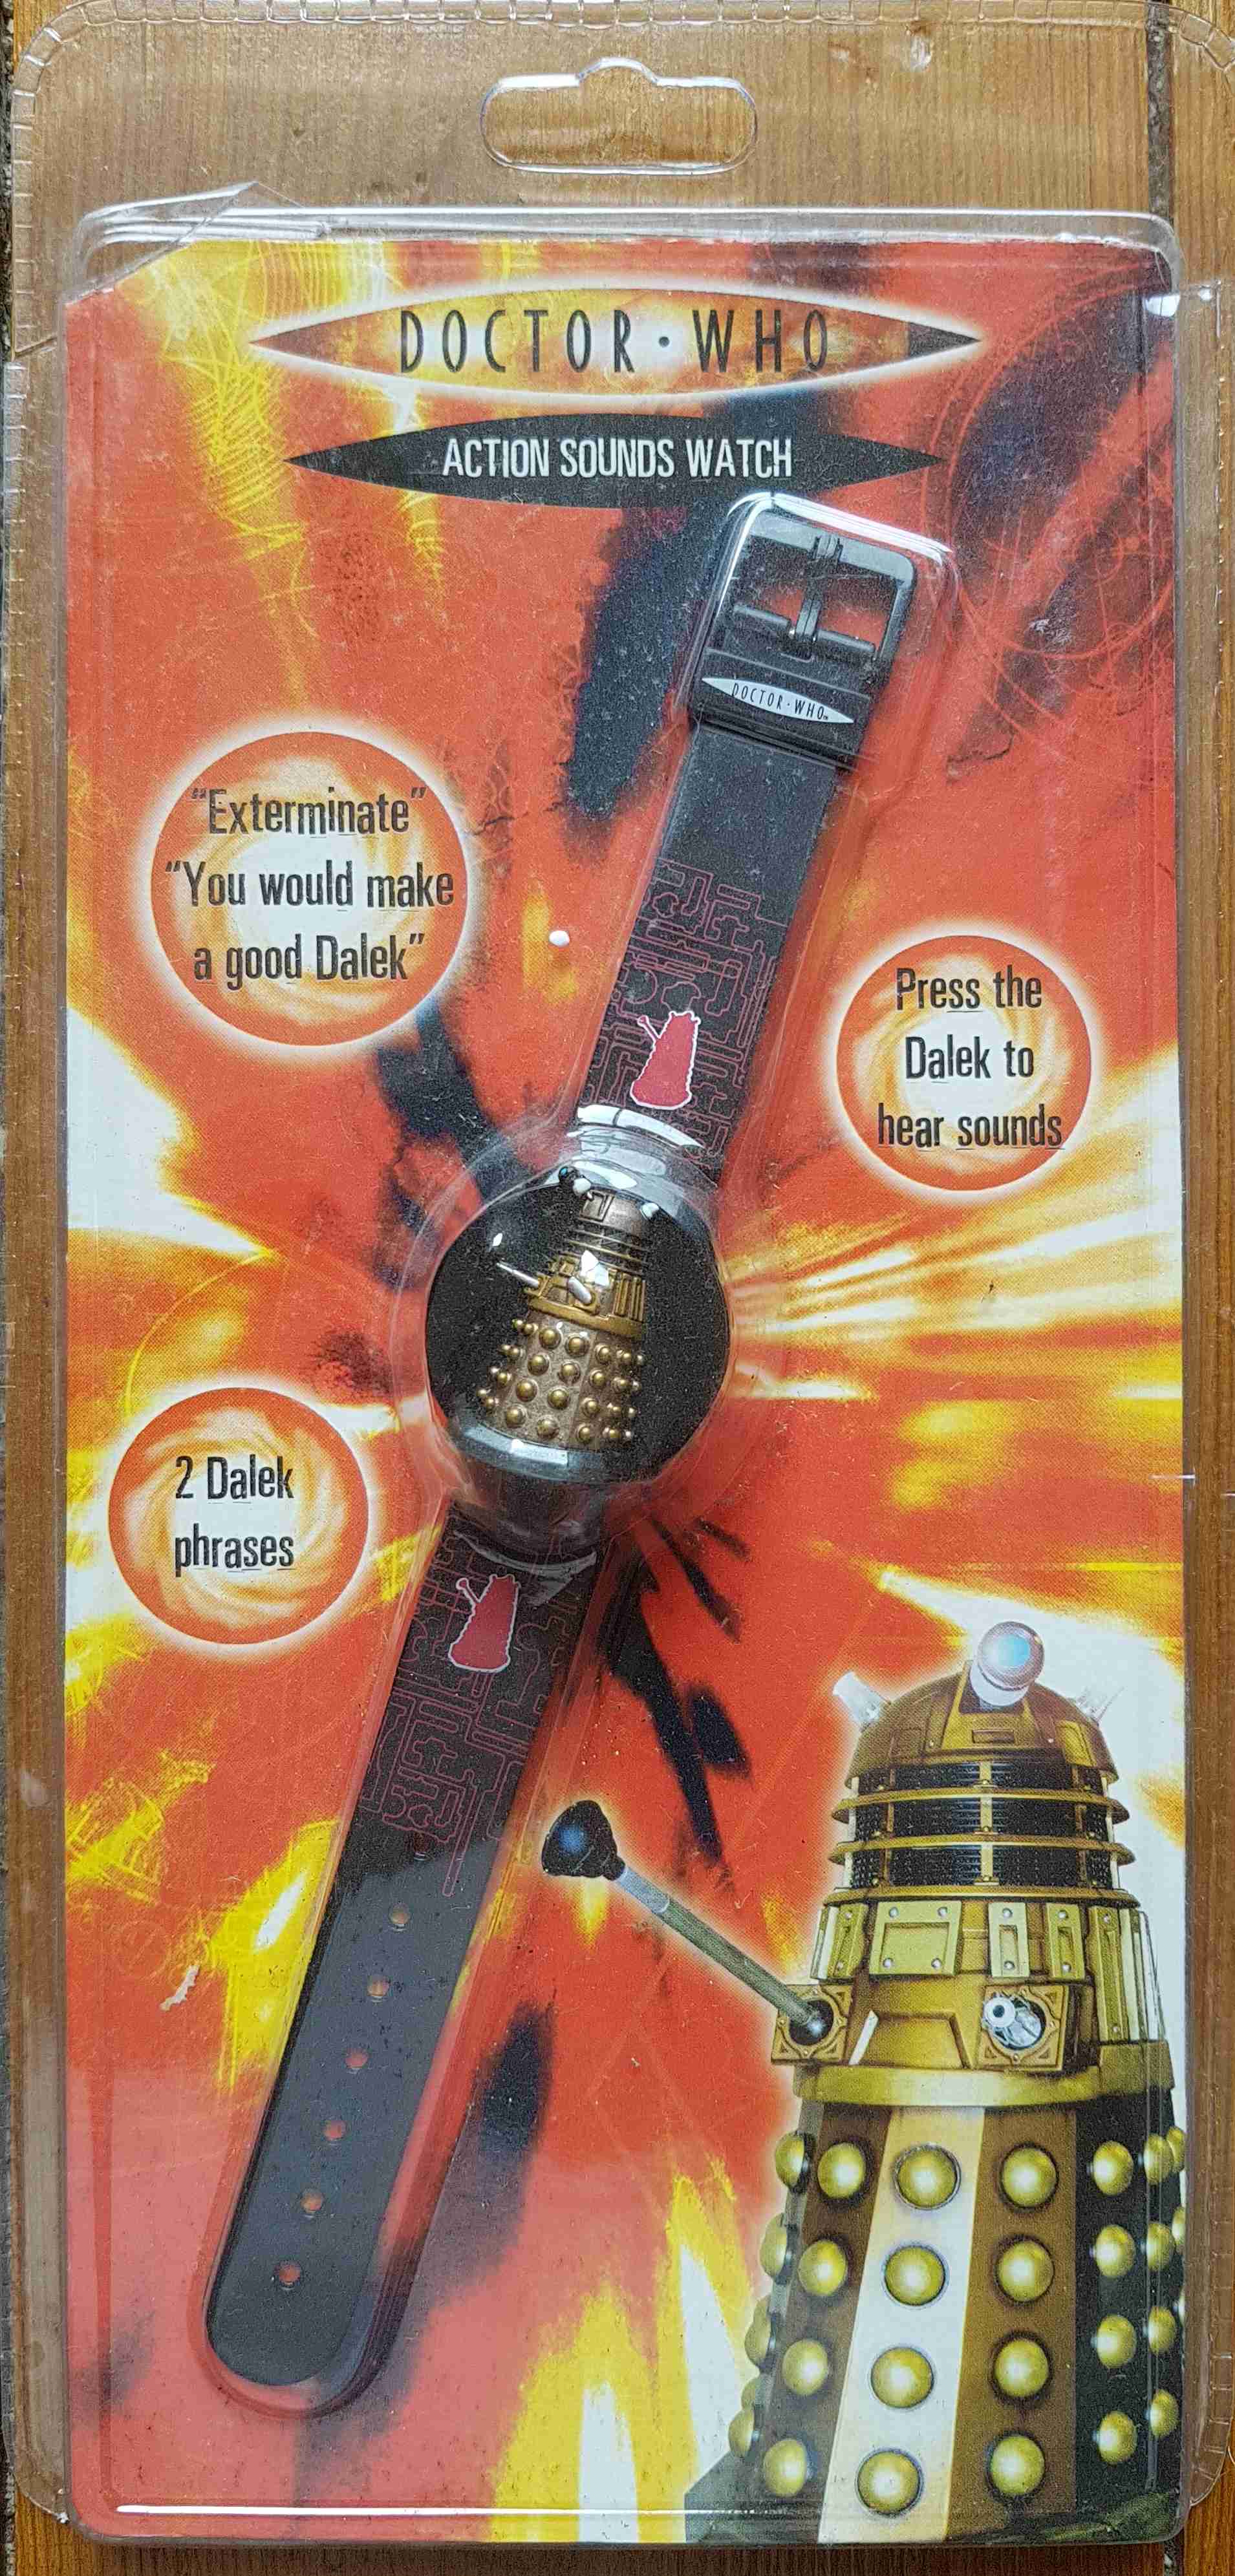 Picture of Watch-Dalek Watch - Dalek by artist  from the BBC records and Tapes library